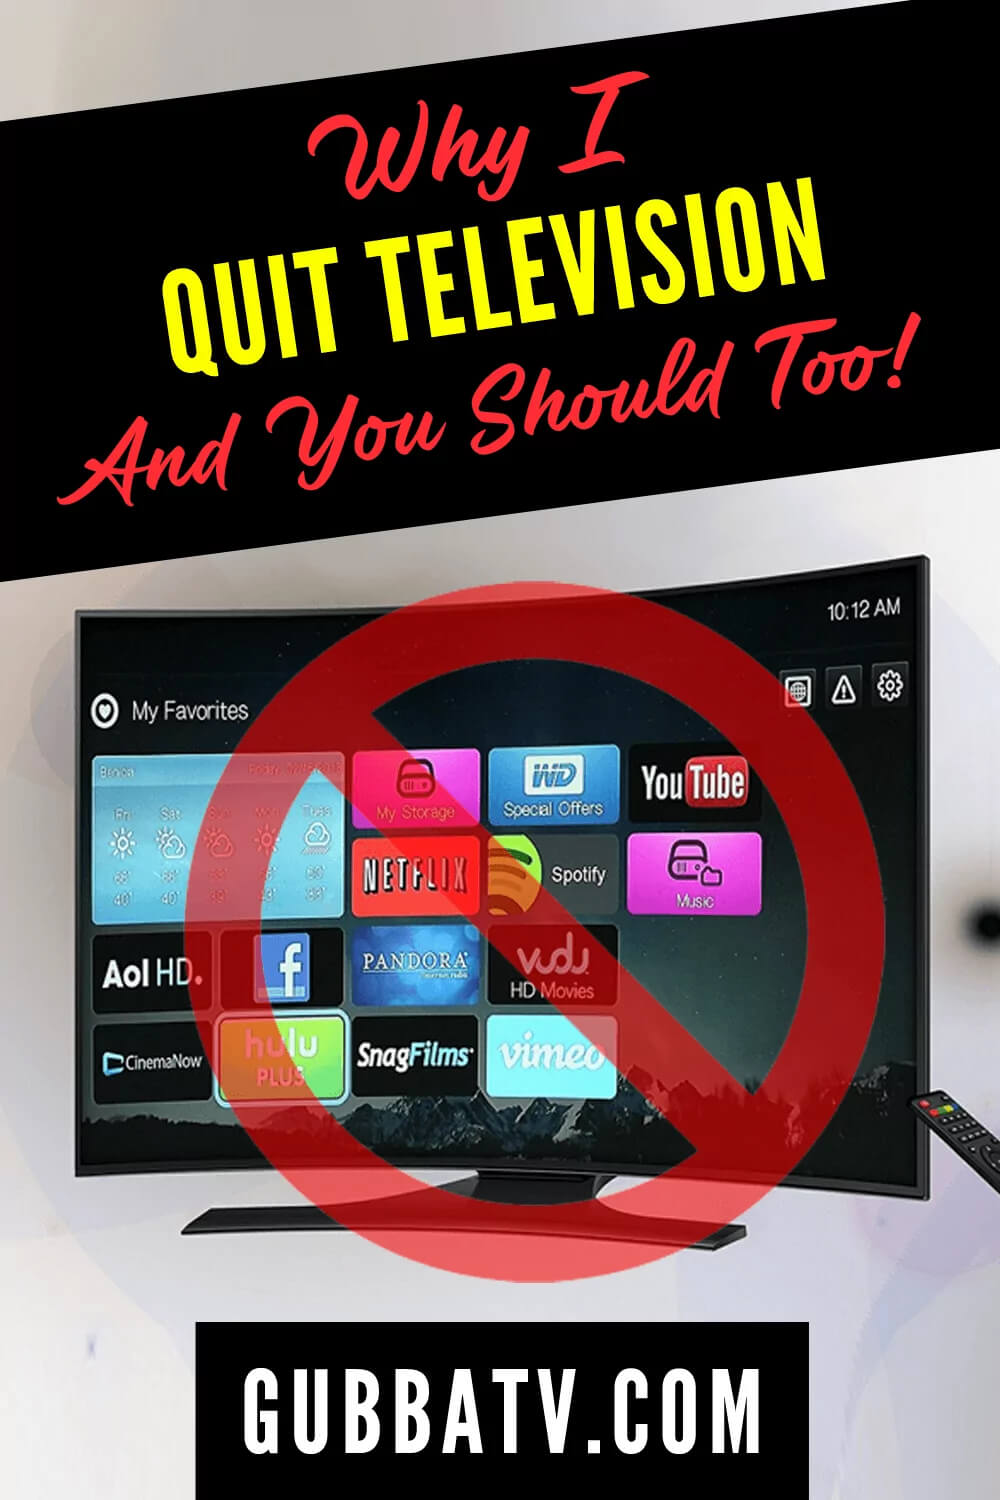 Why I Cancelled Television And You Should Too!